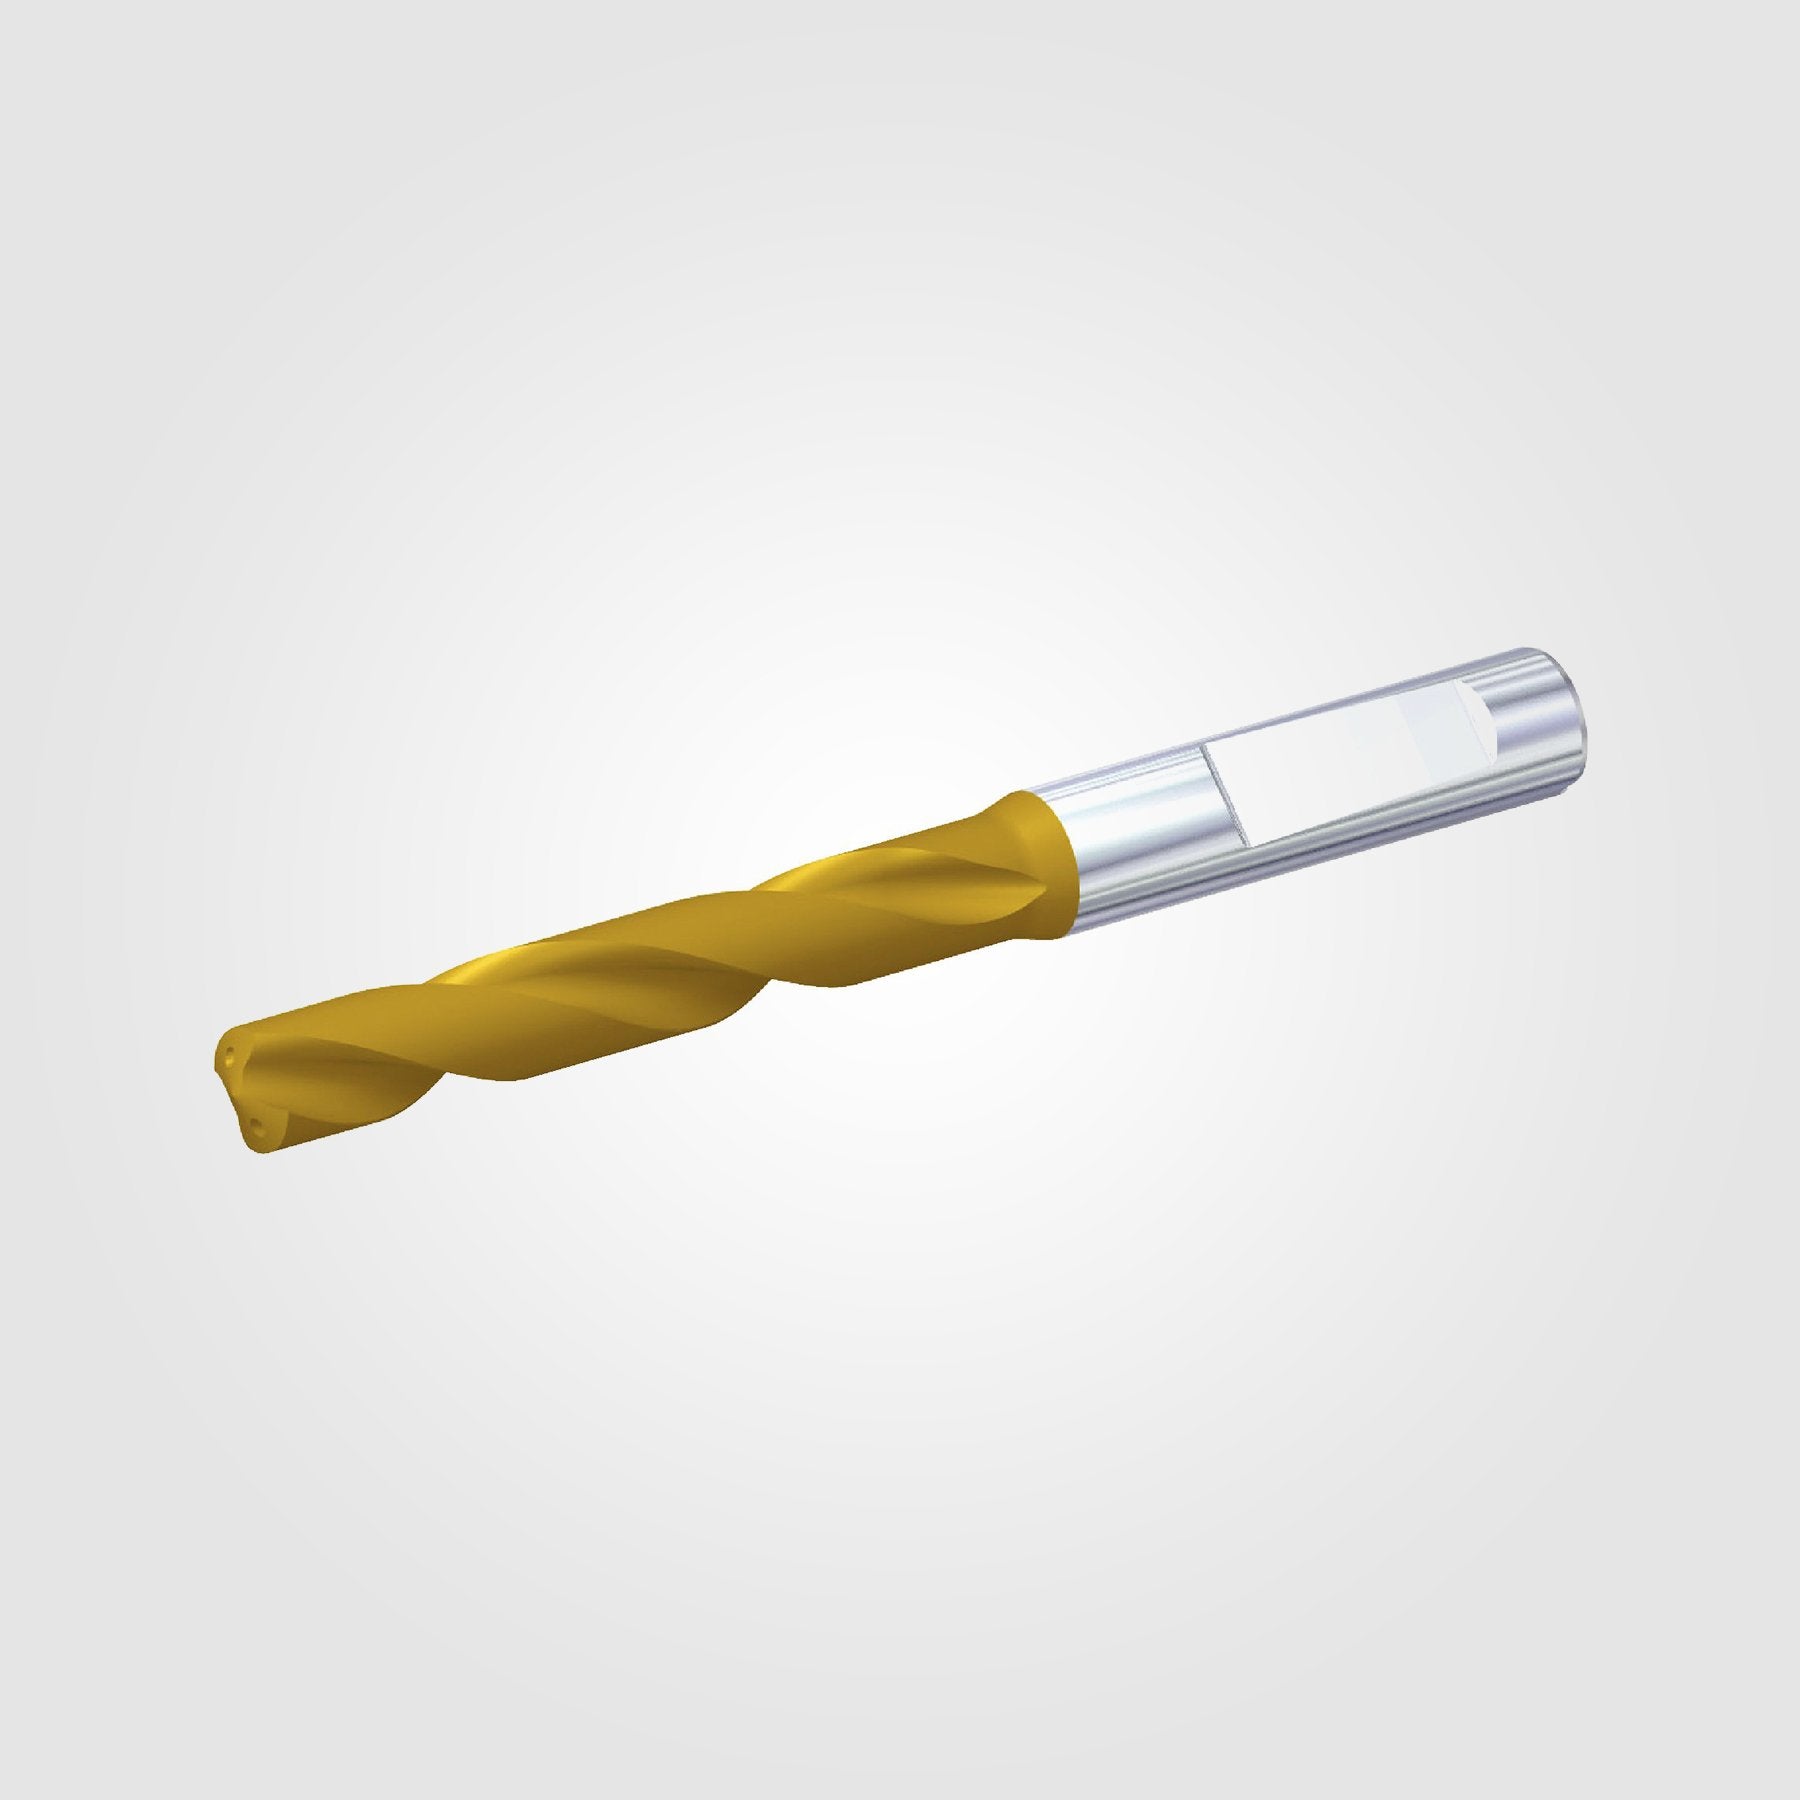 GOdrill (THROUGH COOLANT) | 12.7mm / .5000" / 5xD | SOLID CARBIDE DRILL | 4149519